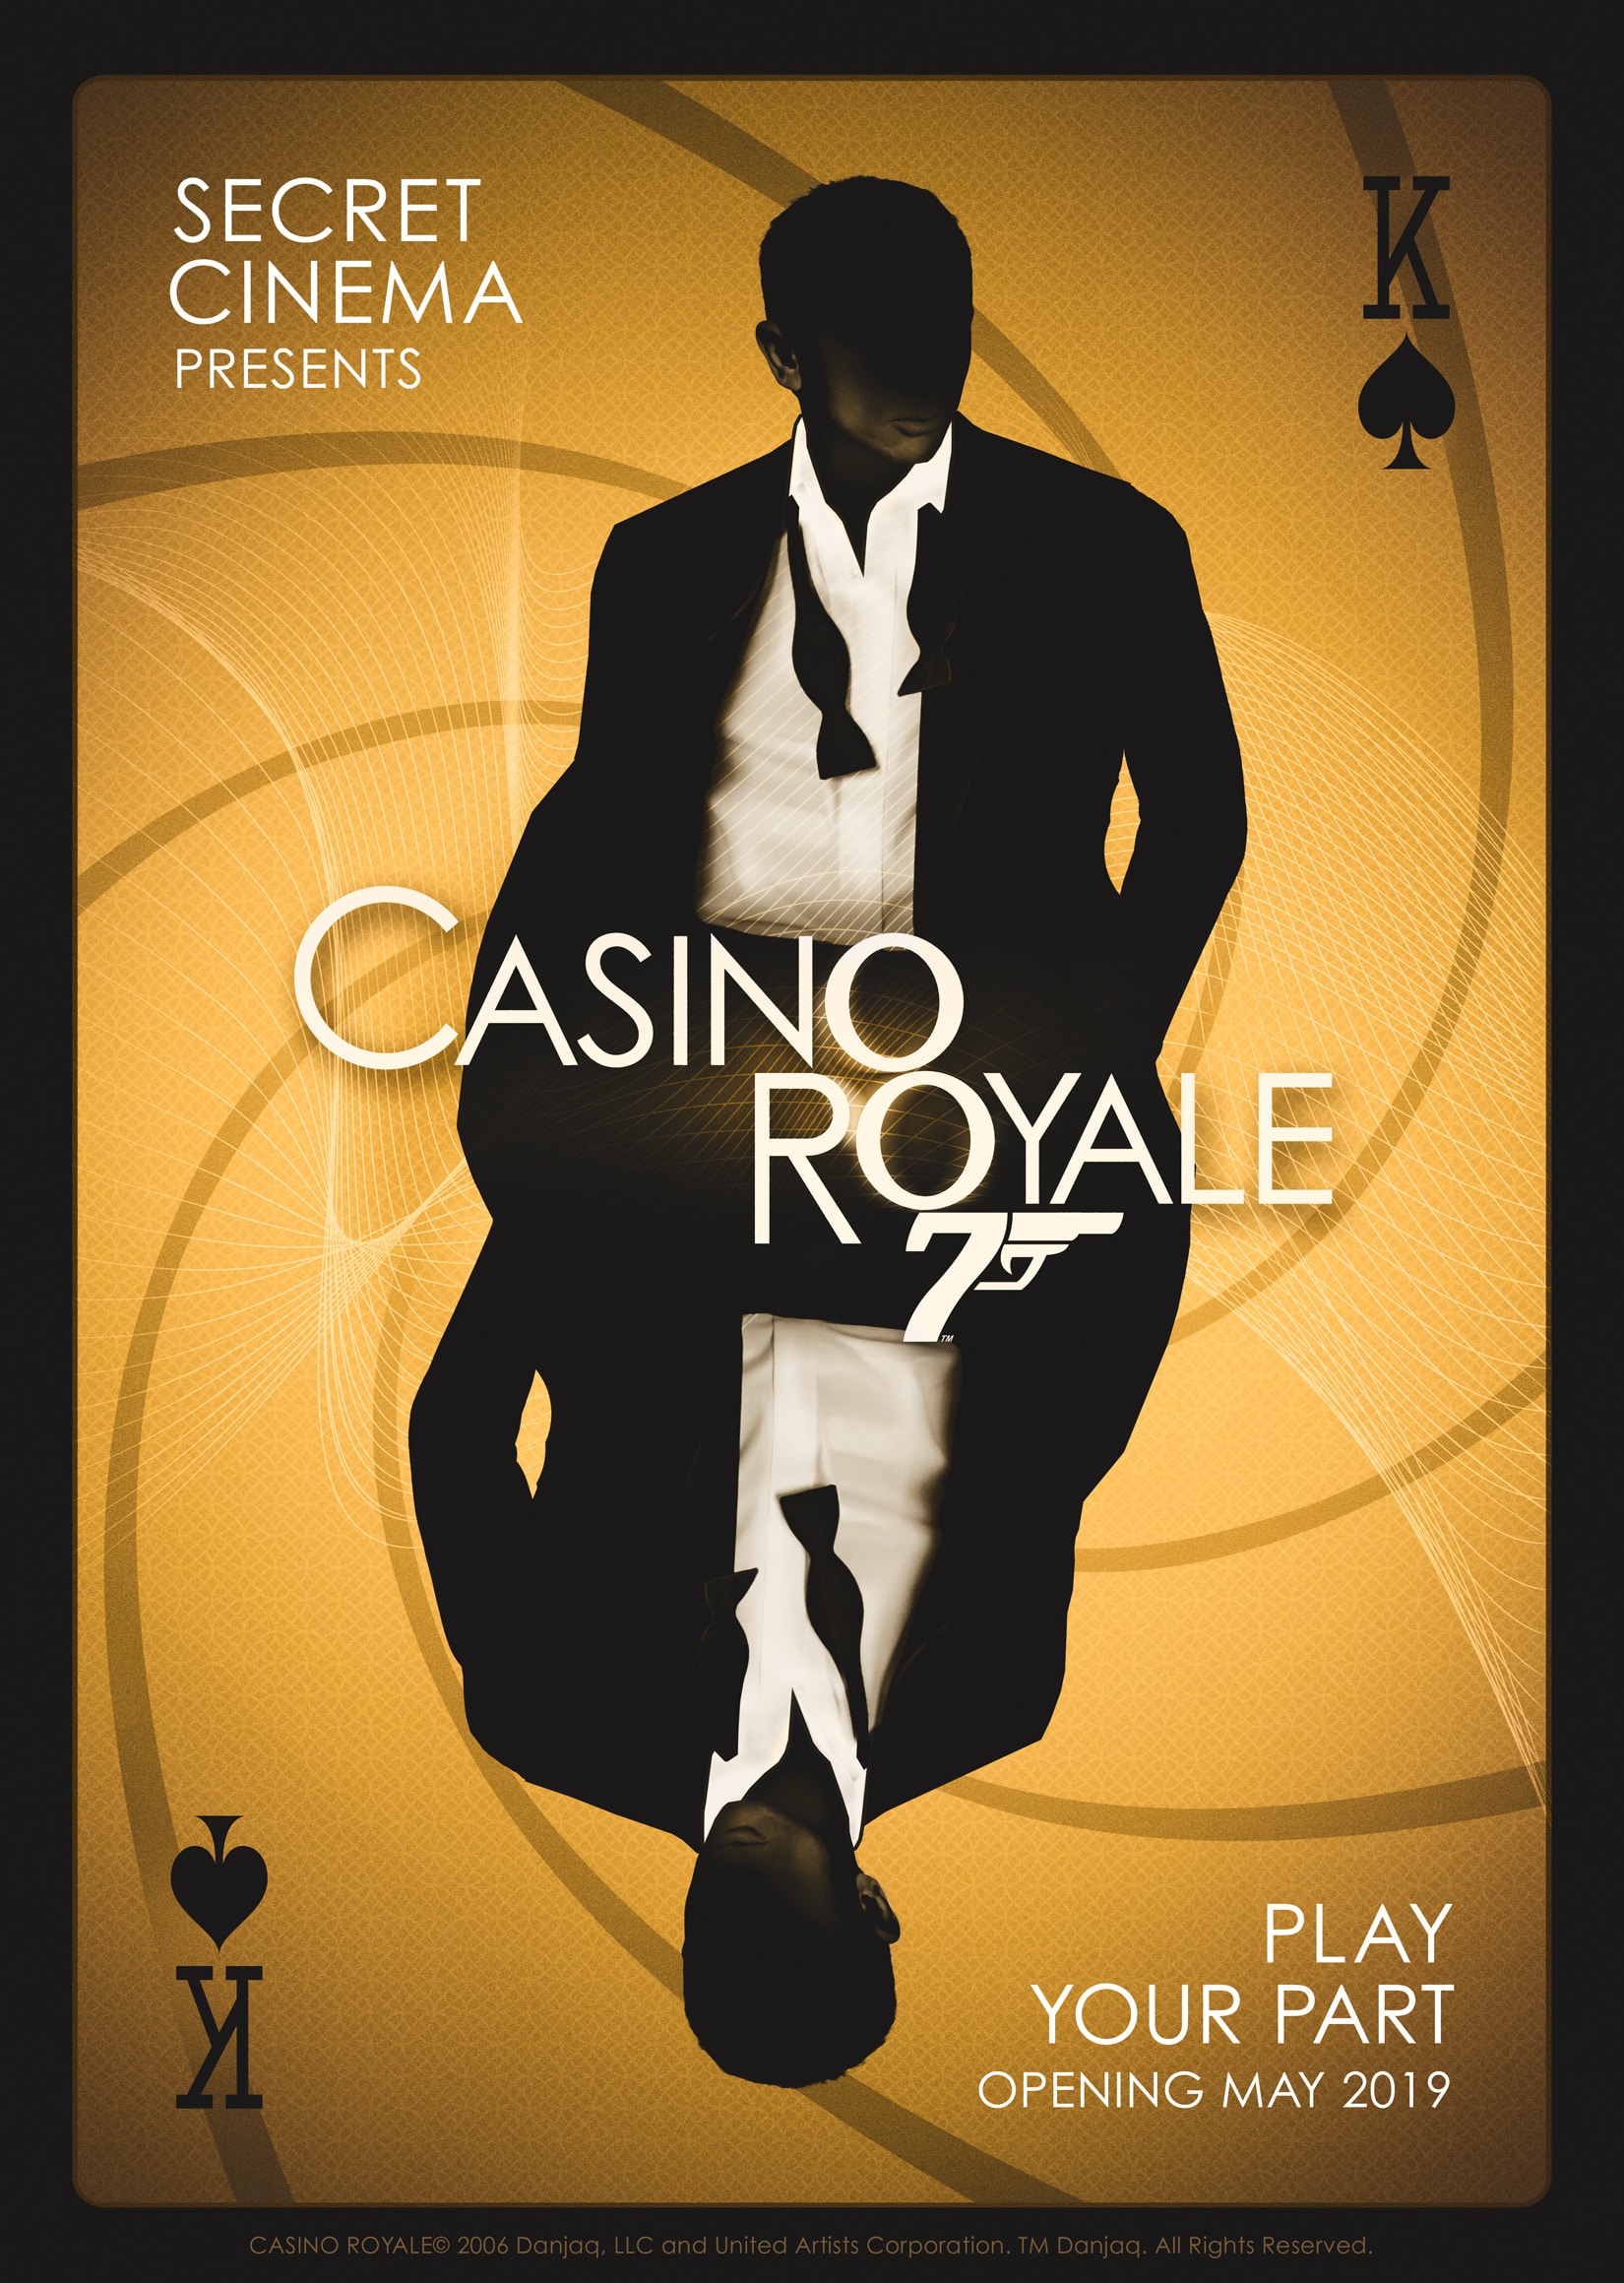 Mark Burgess Has Just Finished Performing As Mr White In The Top Secret Production Of Casino Royale With Secret Cinema International Artists Management